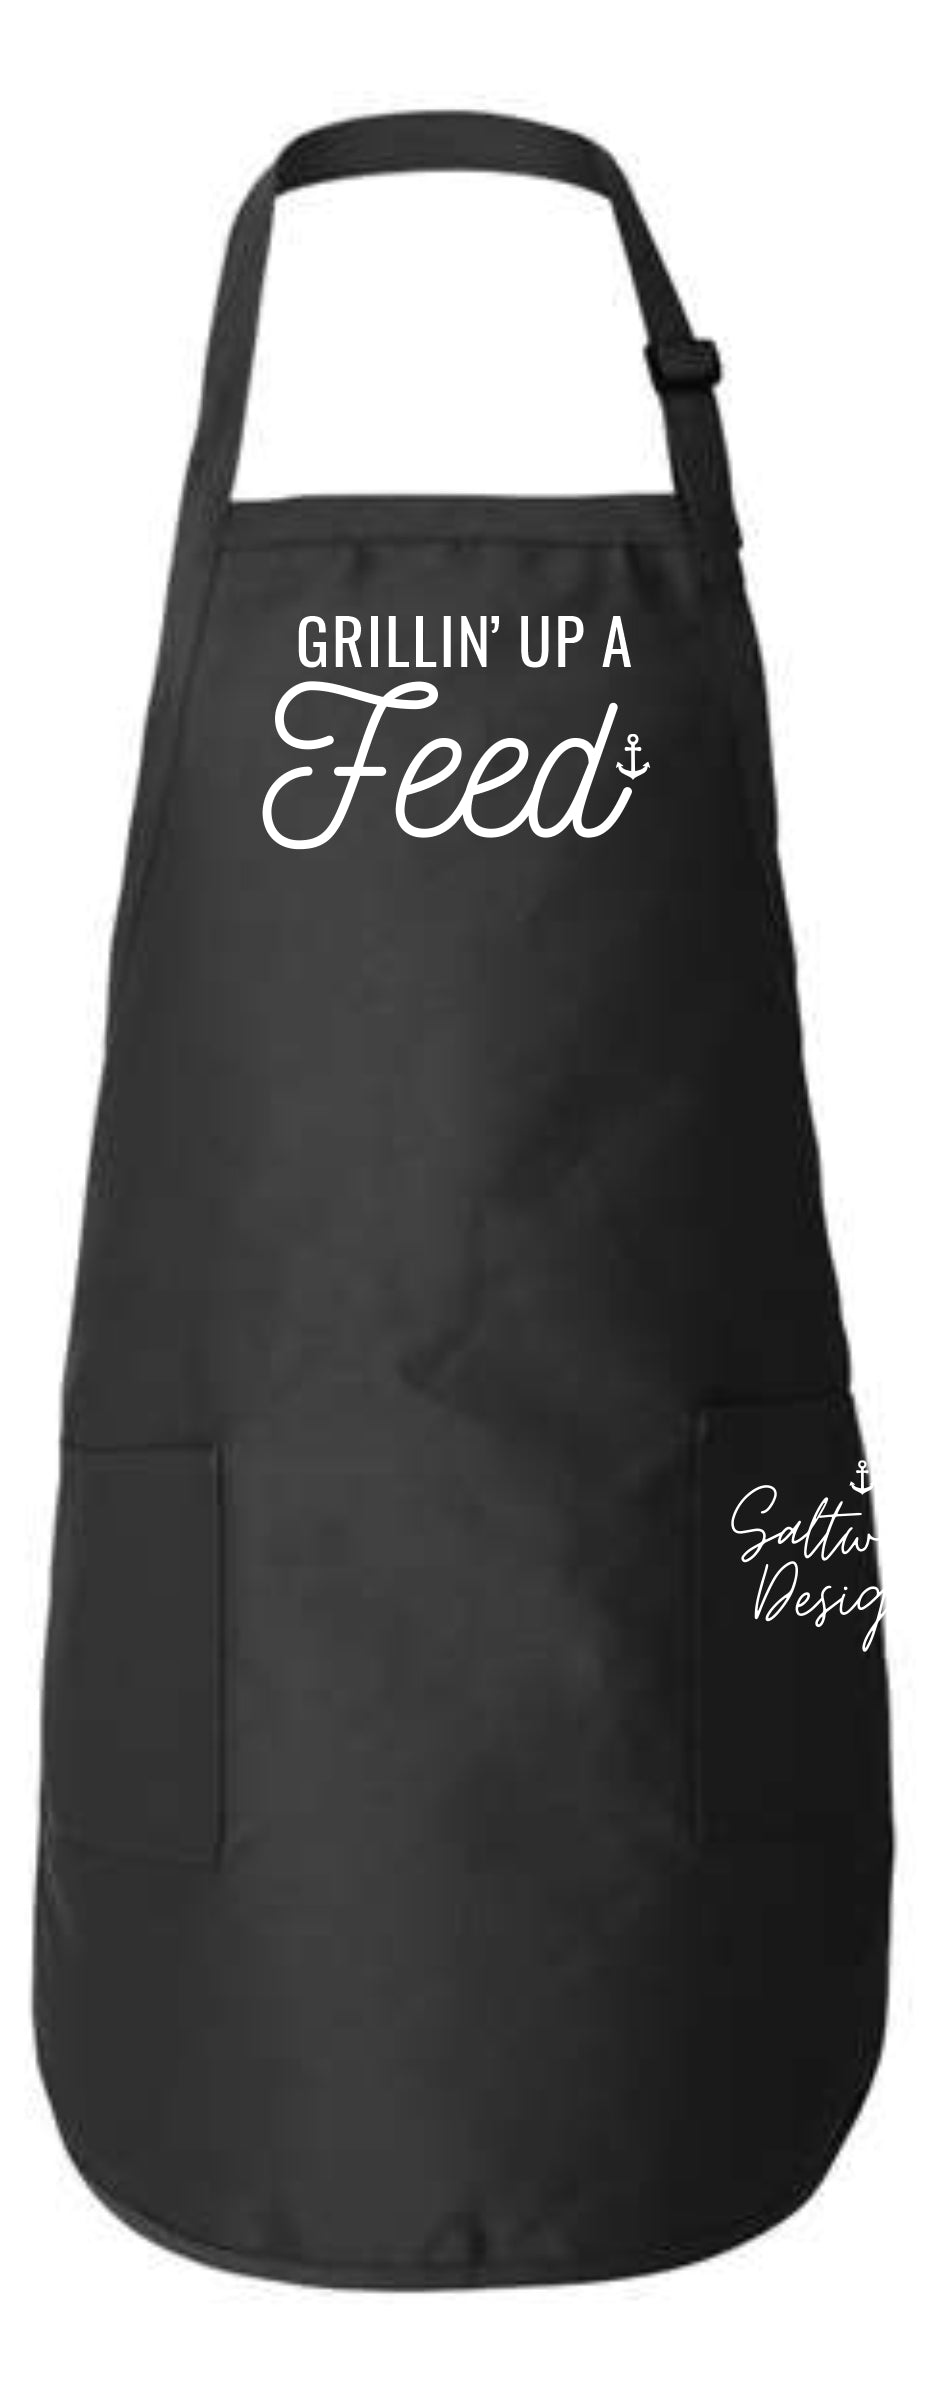 "Grillin' Up A Feed" Apron